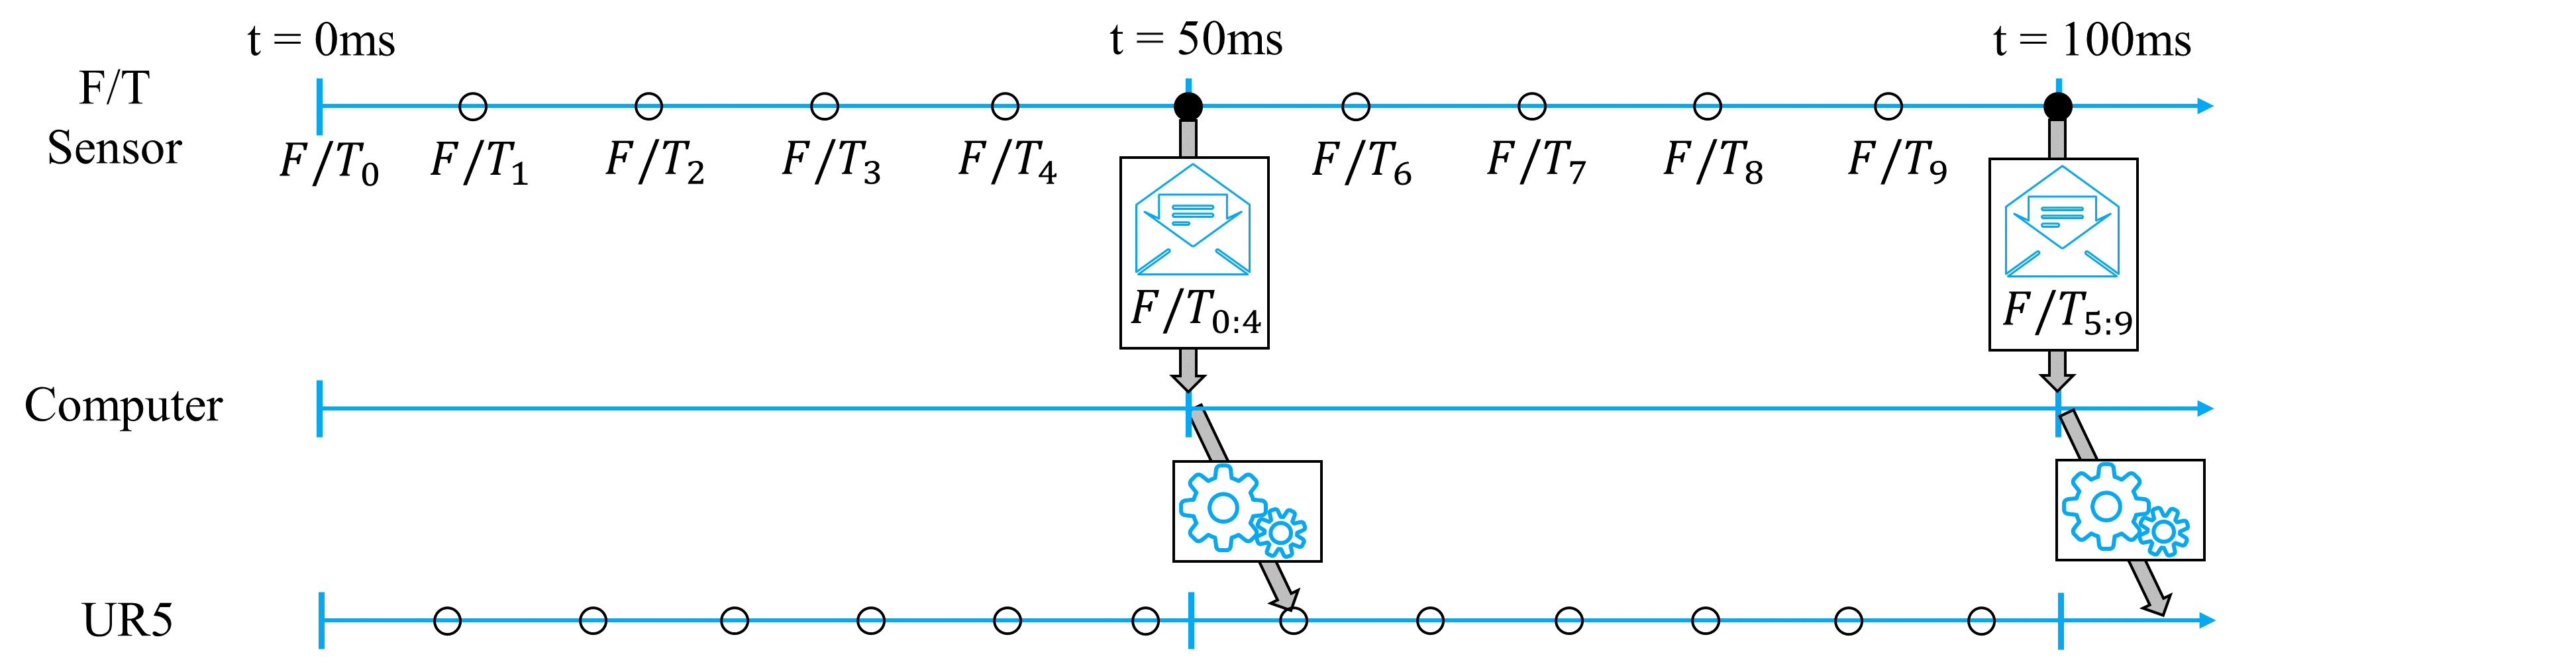  A naive robot control scheme that only commands the robot when a F/T packet arrives. Since packets arrive at 20 Hz and the robot can be commanded at 125 Hz, this approach does not utilize the robot to its fastest capability.